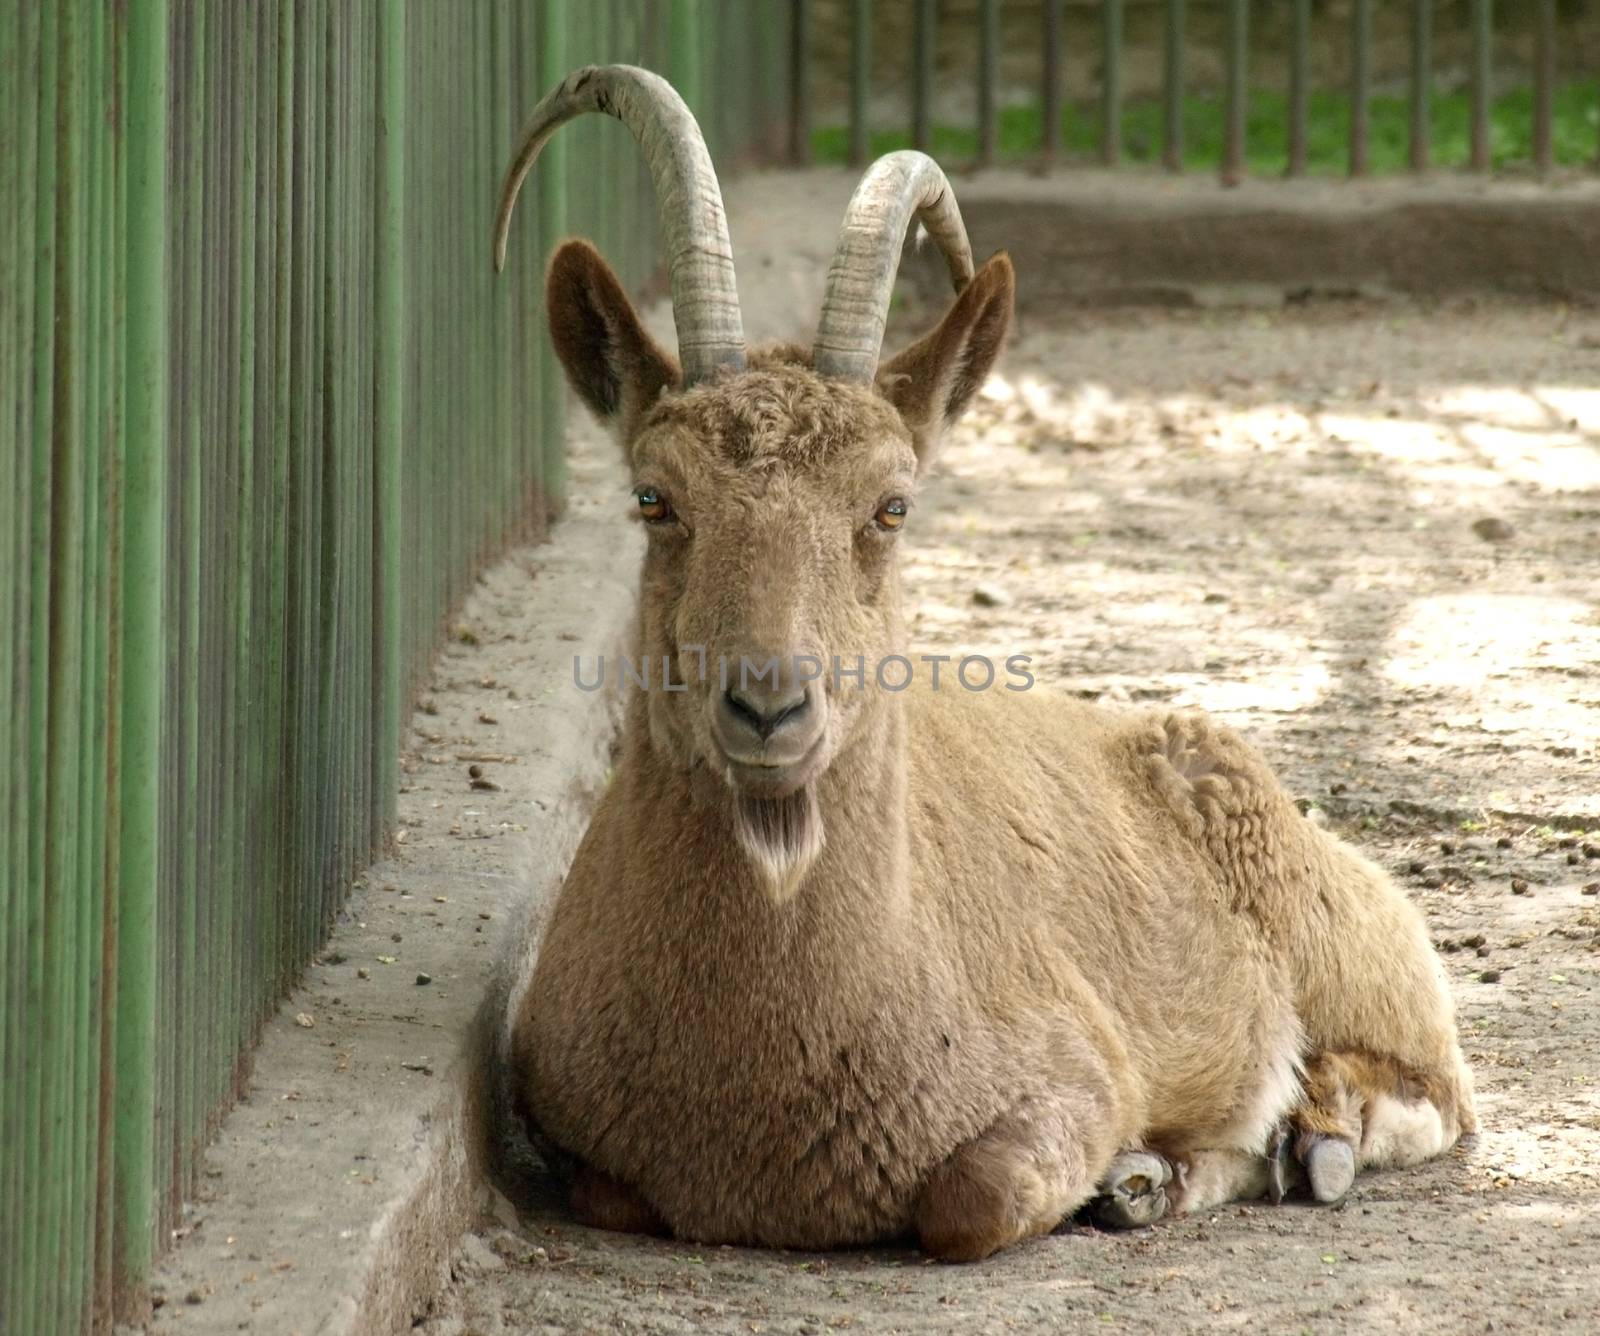 A frontal portrait of a goat with horns